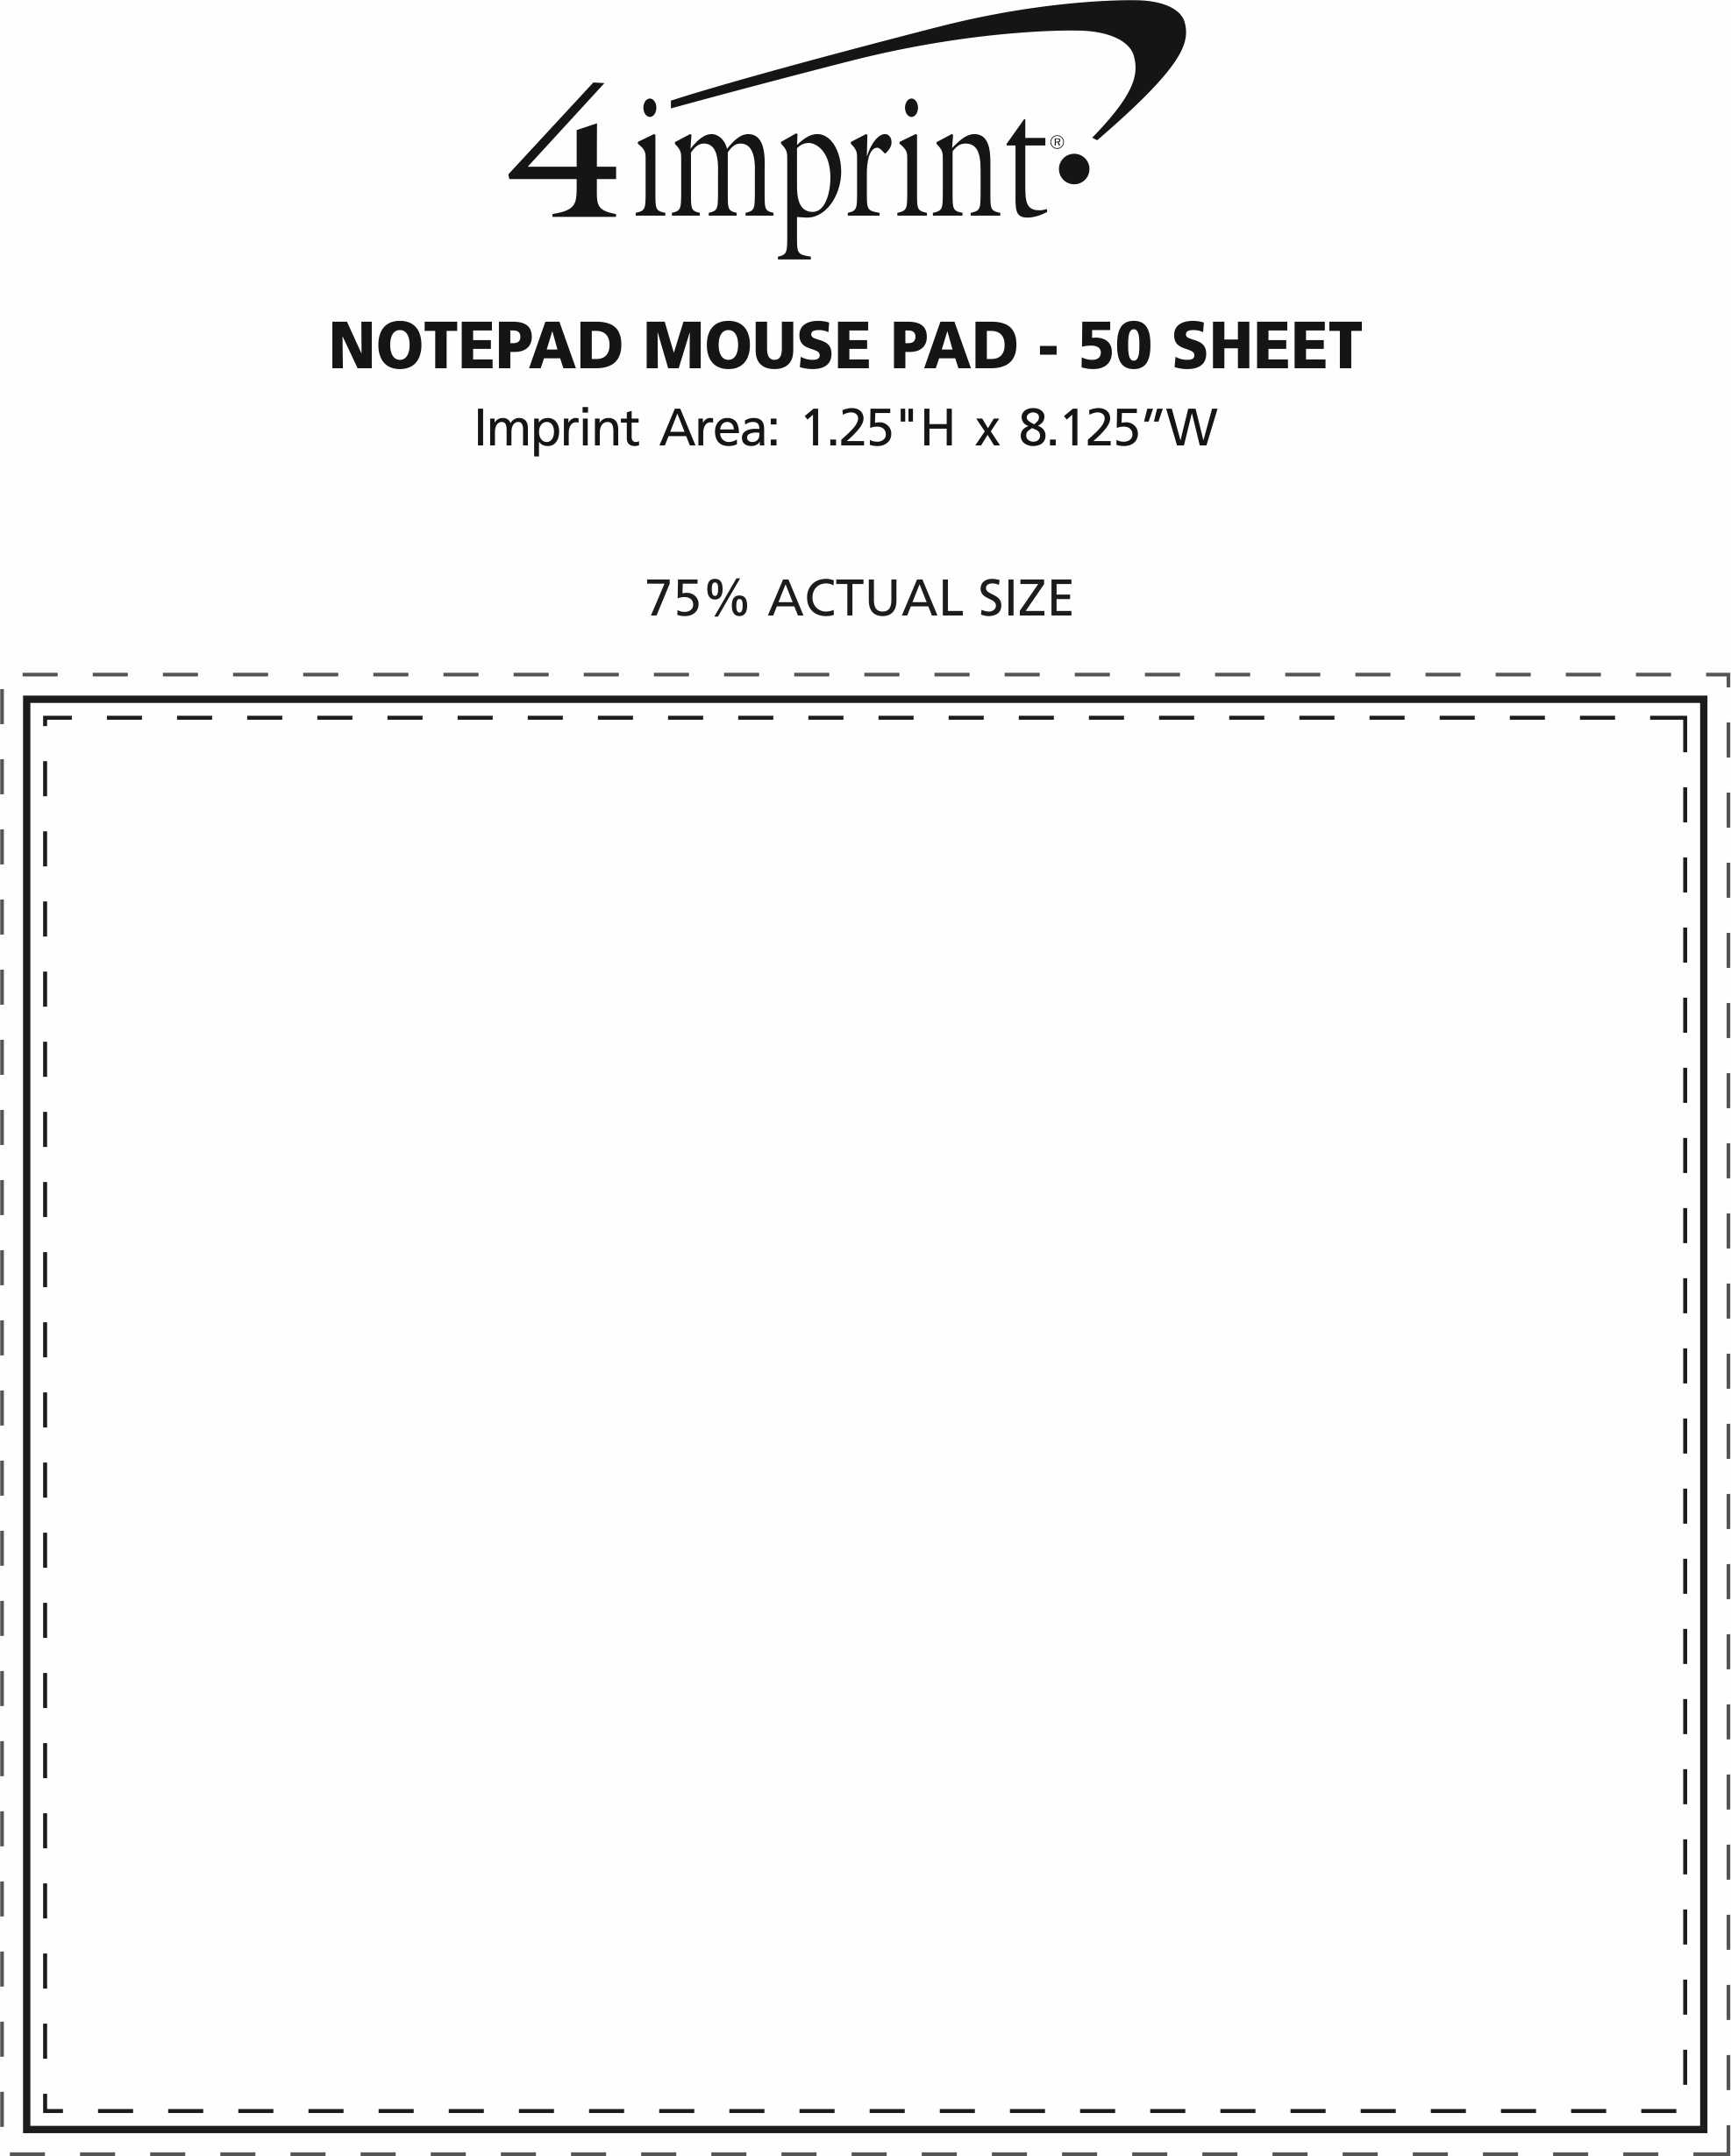 Imprint Area of Notepad Mouse Pad - 50 Sheet